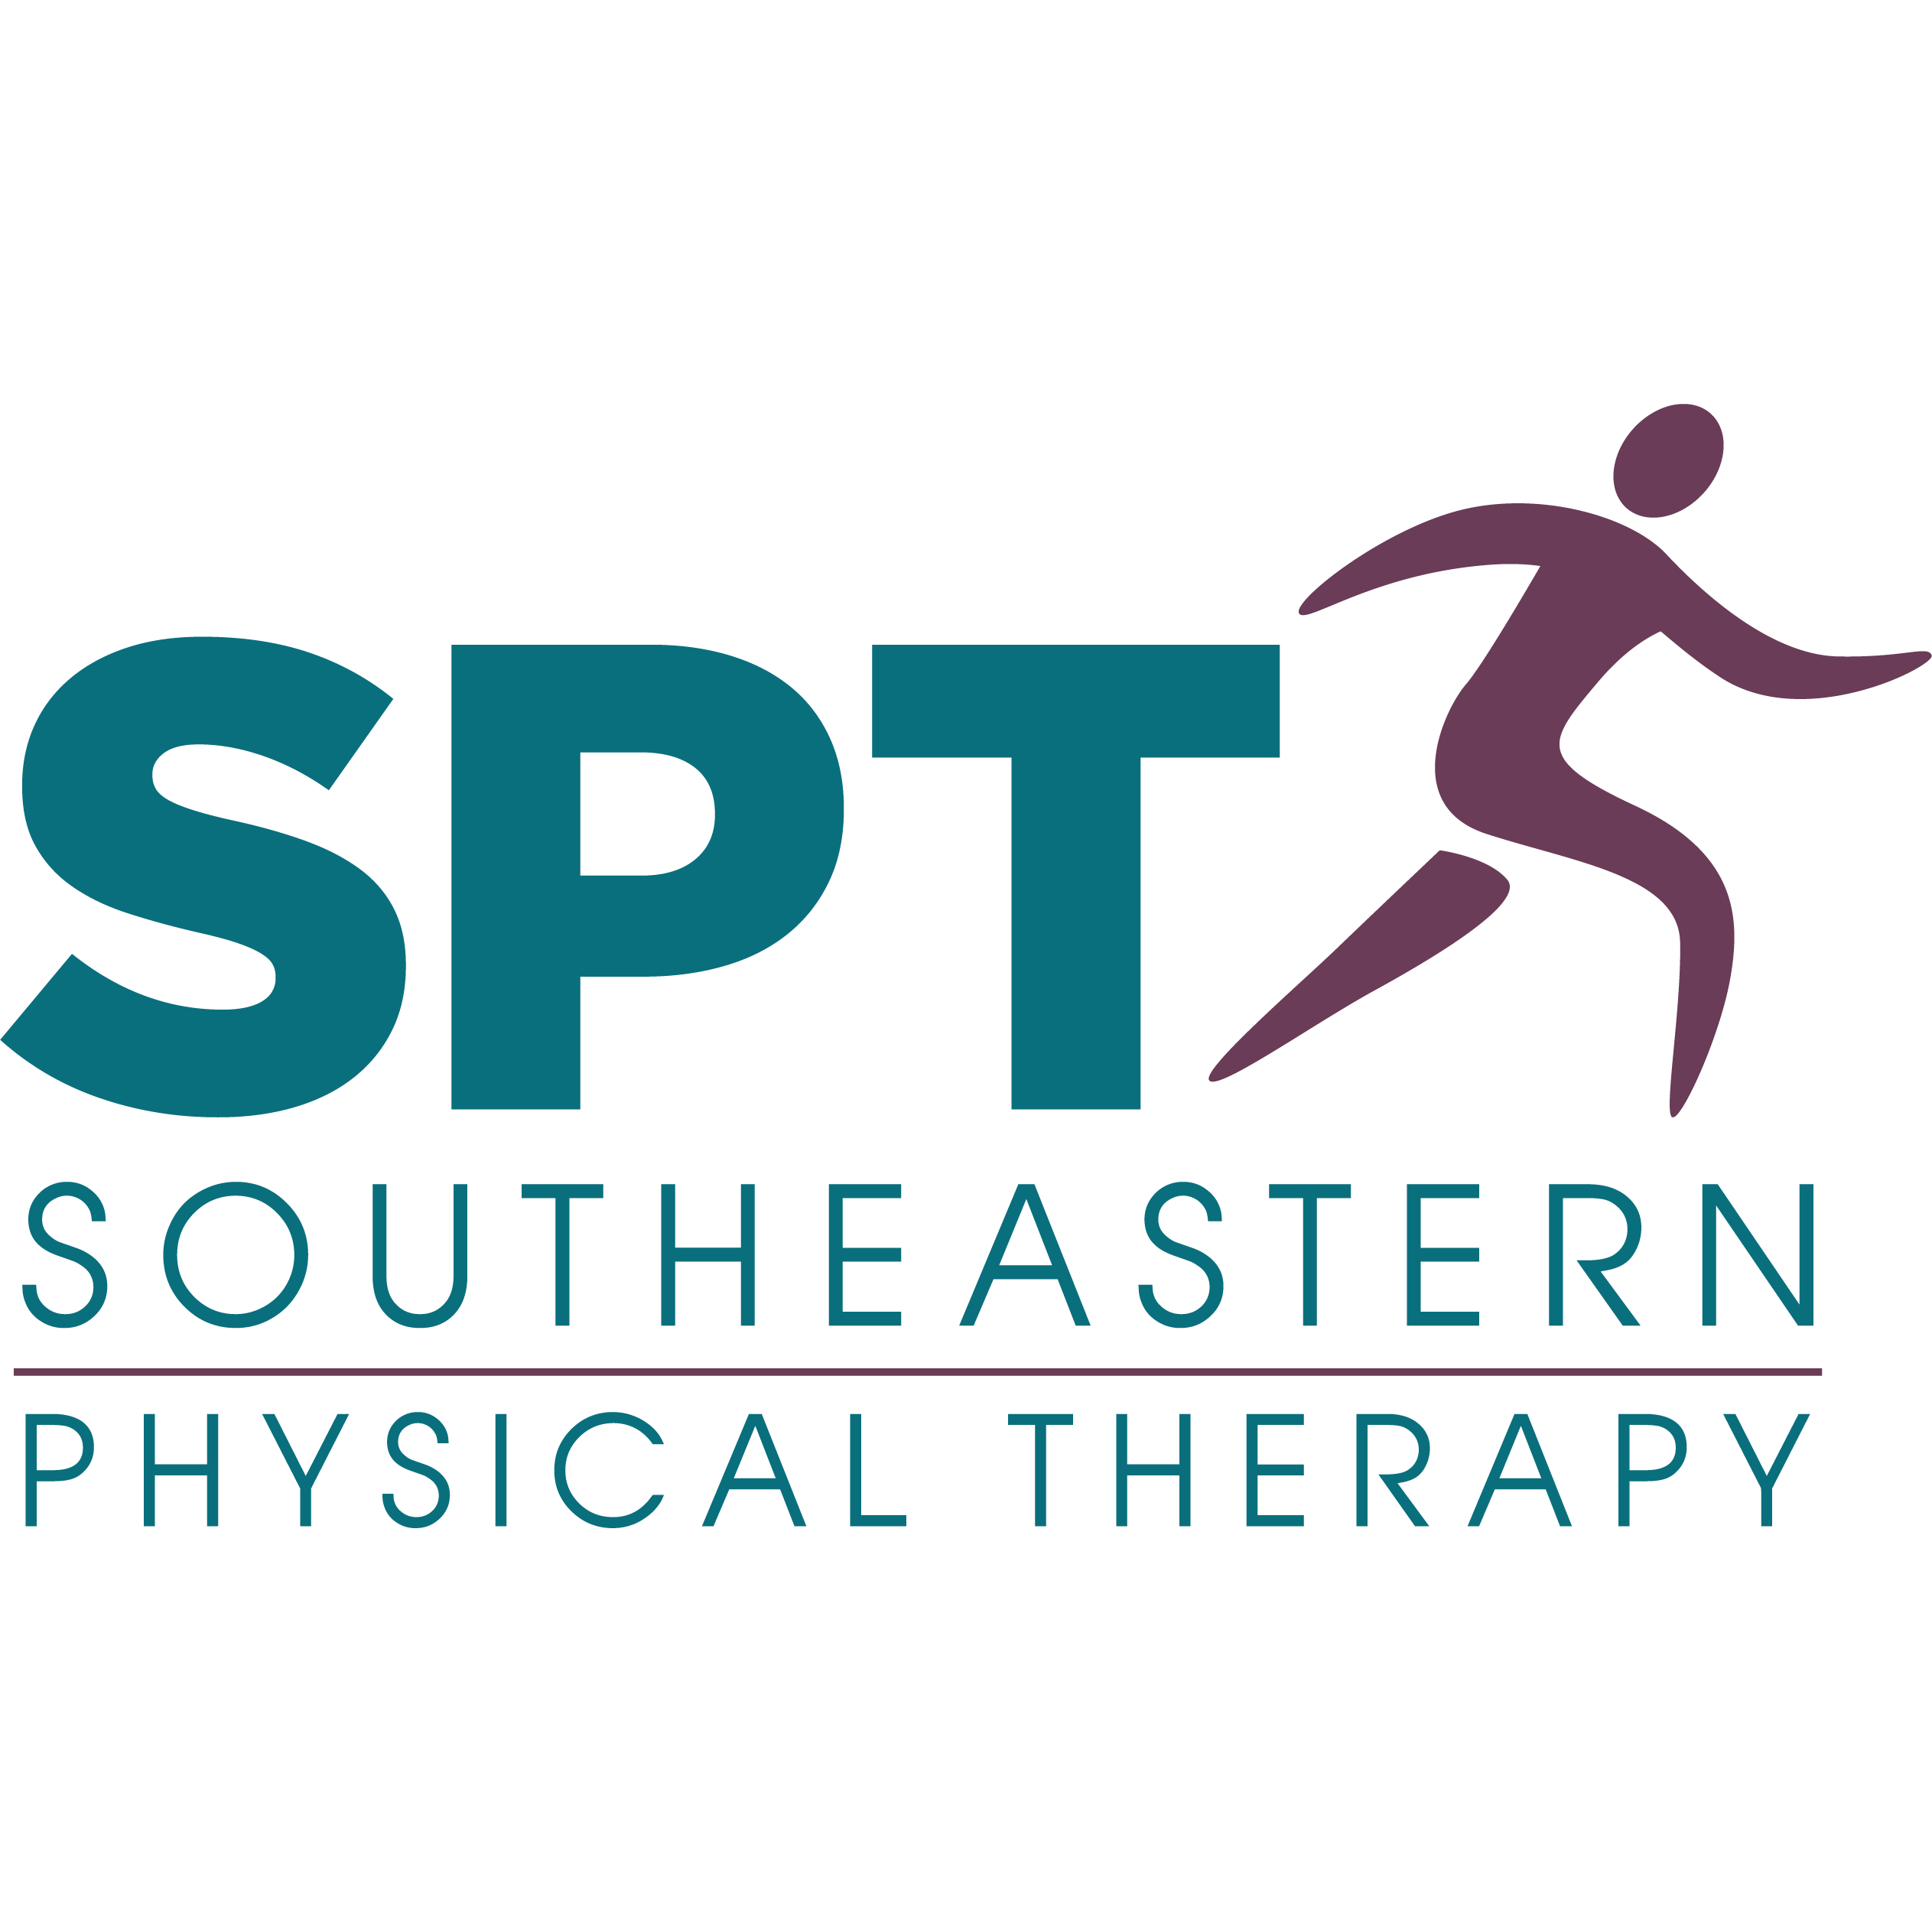 Southeastern Physical Therapy Logo